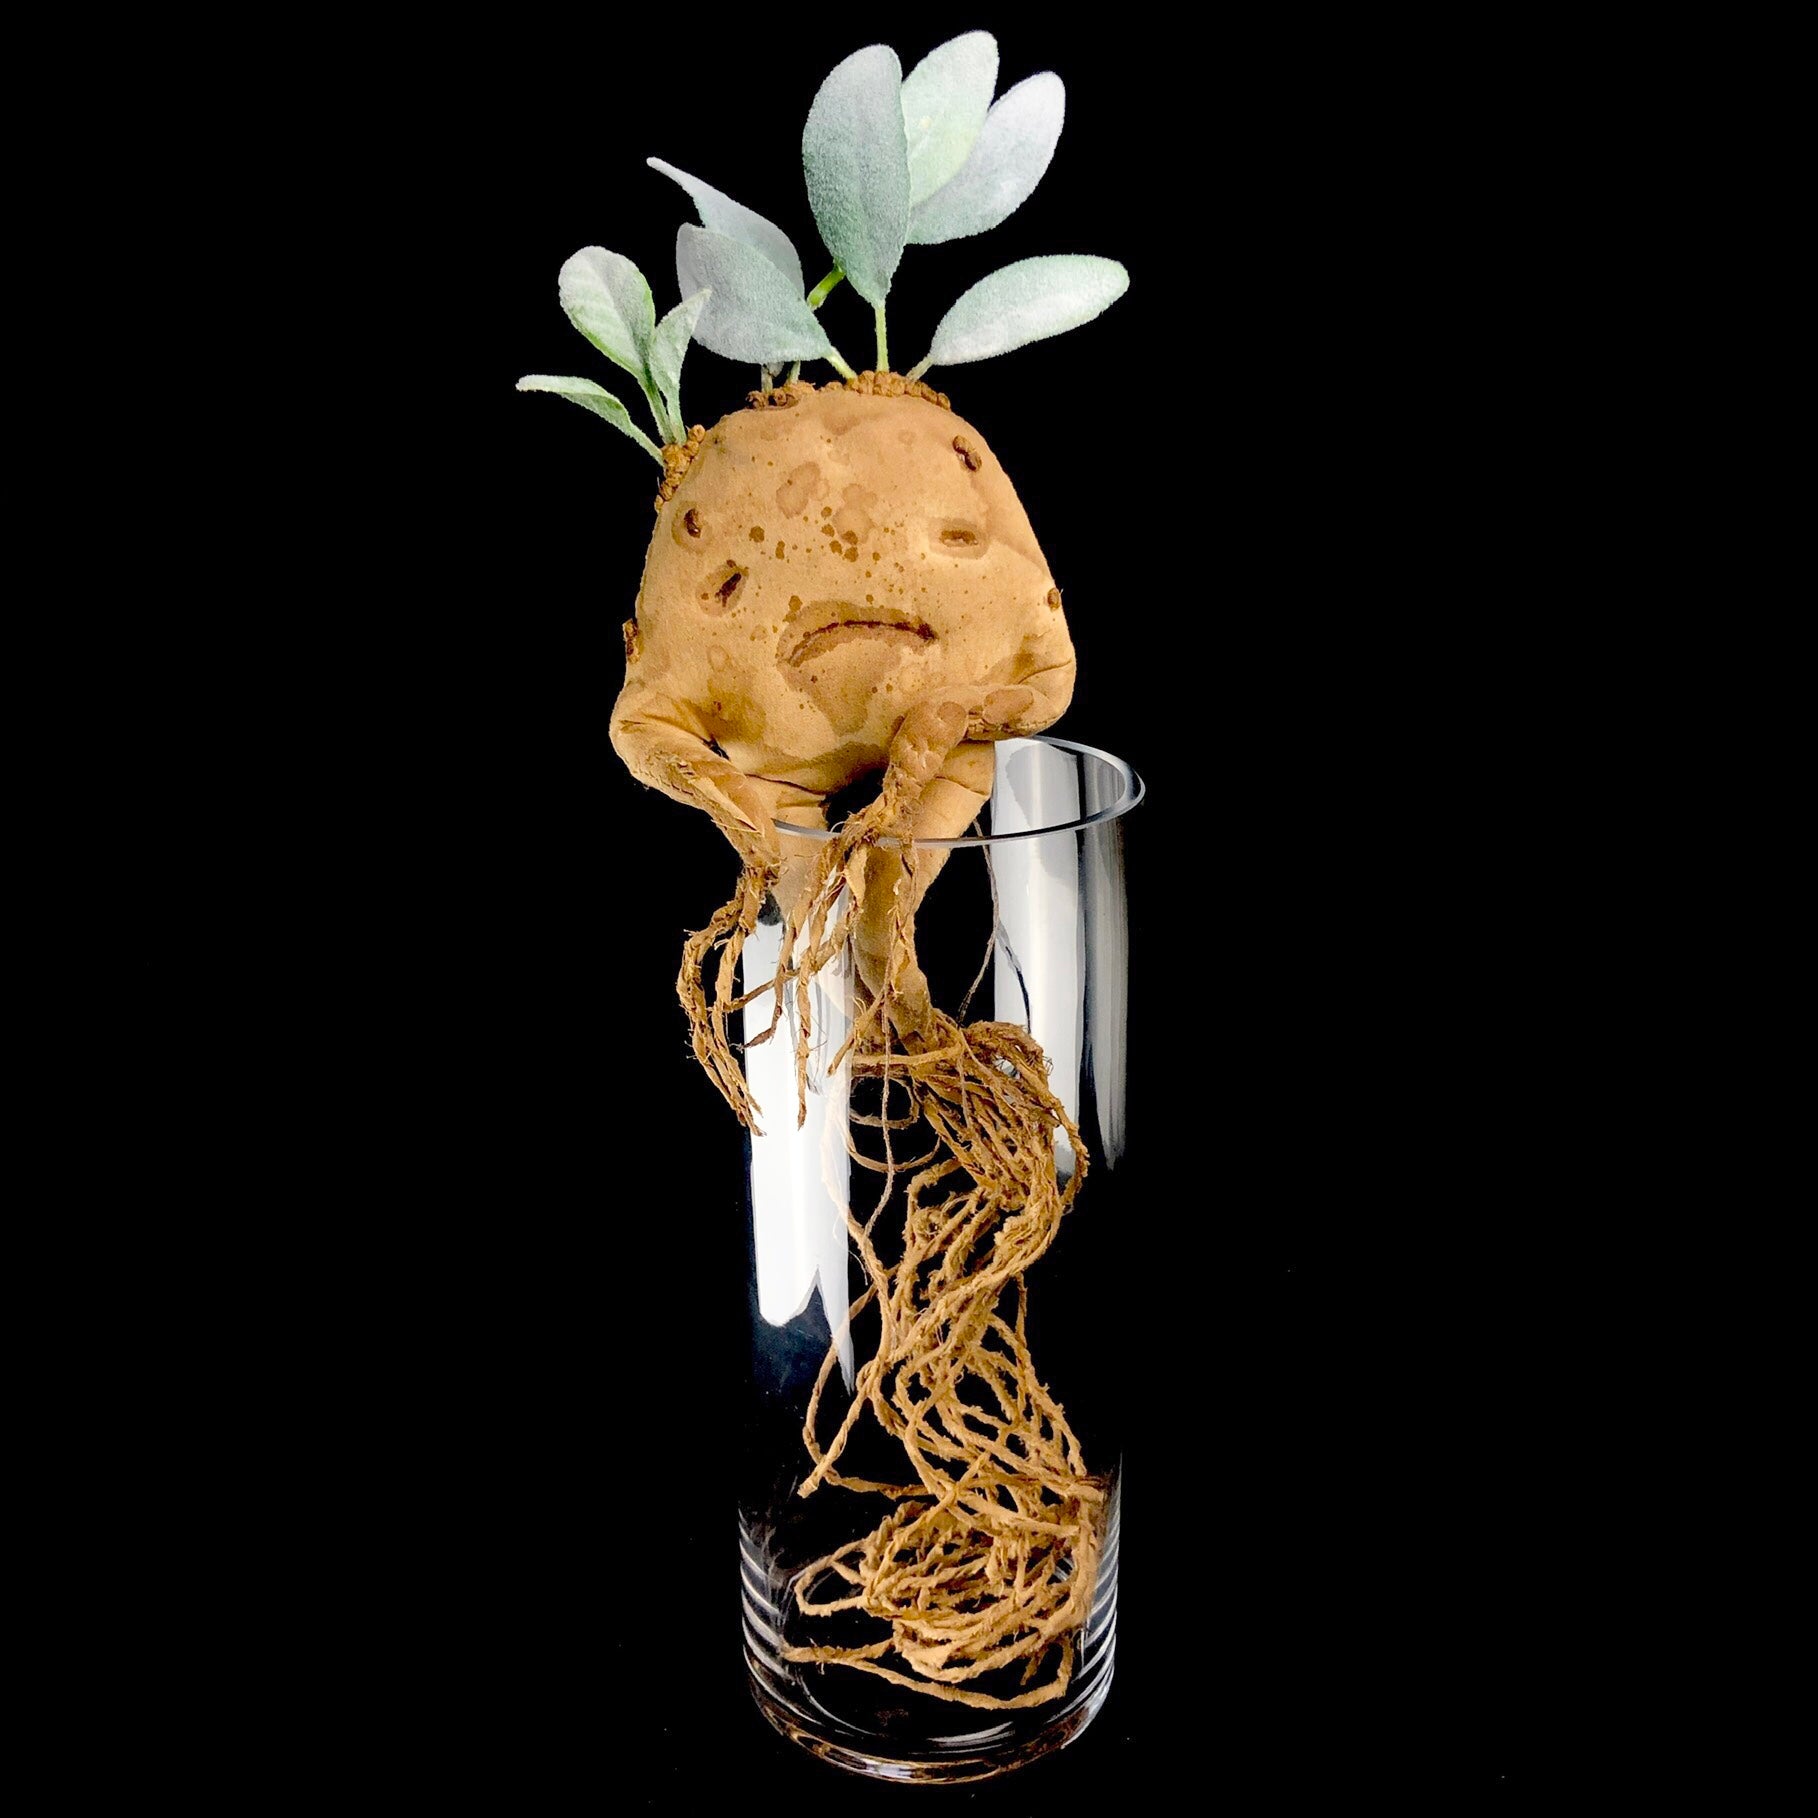 Brown rootlike creature with green leaves on its head sitting in glass jar